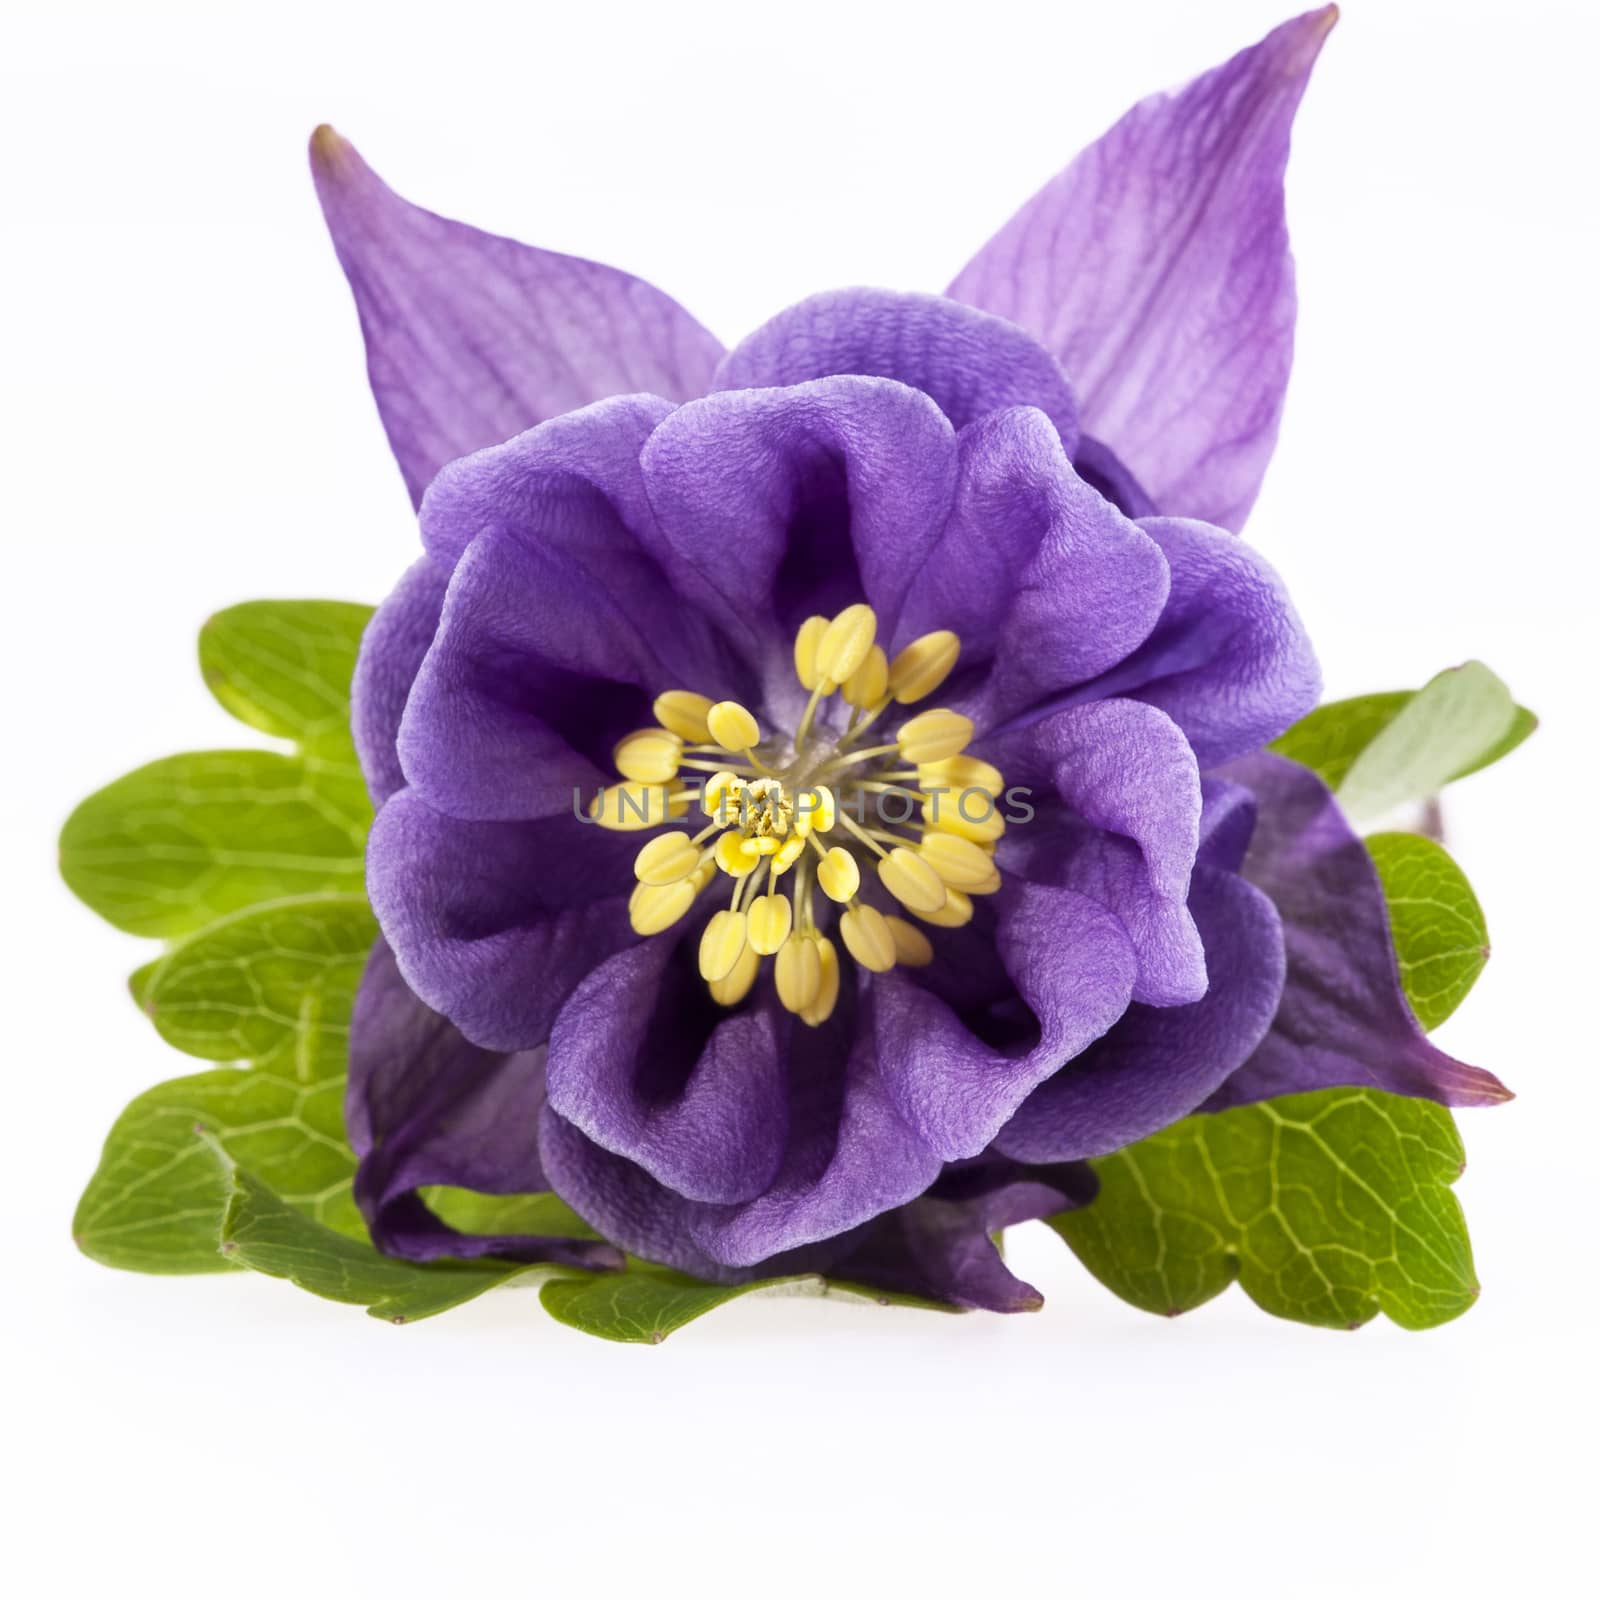 single violet  flower of Aquilegia vulgaris isolated on white background, close up